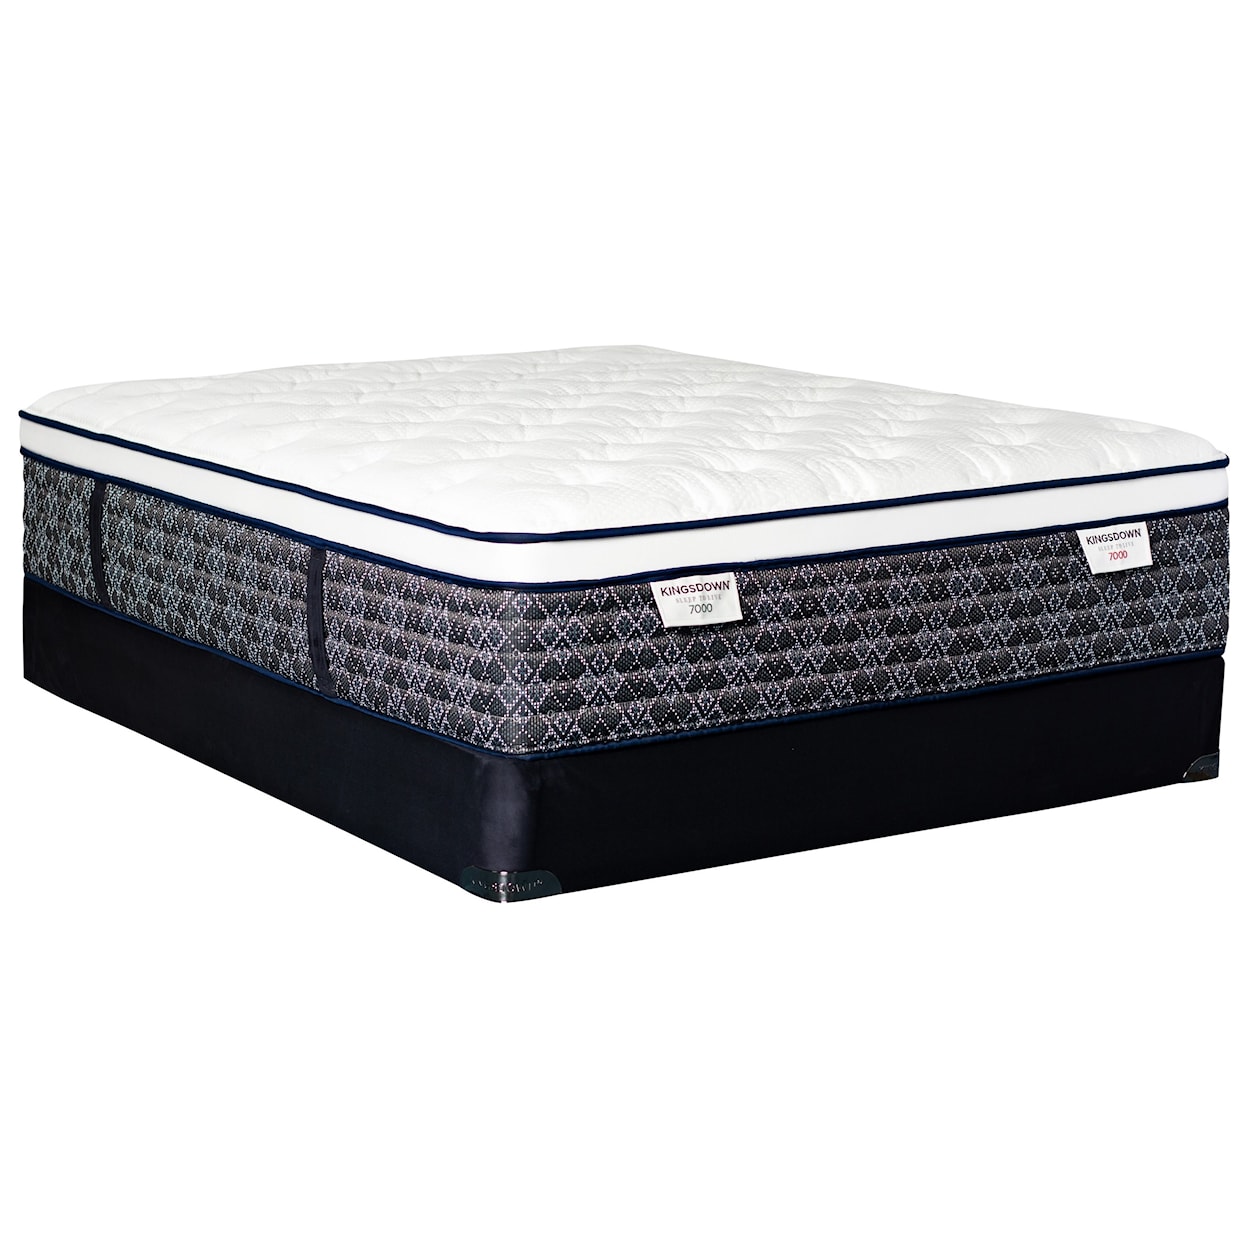 Kingsdown Sleep to Live 7000 Green Red ET Twin Pocketed Coil Mattress LoPro Set